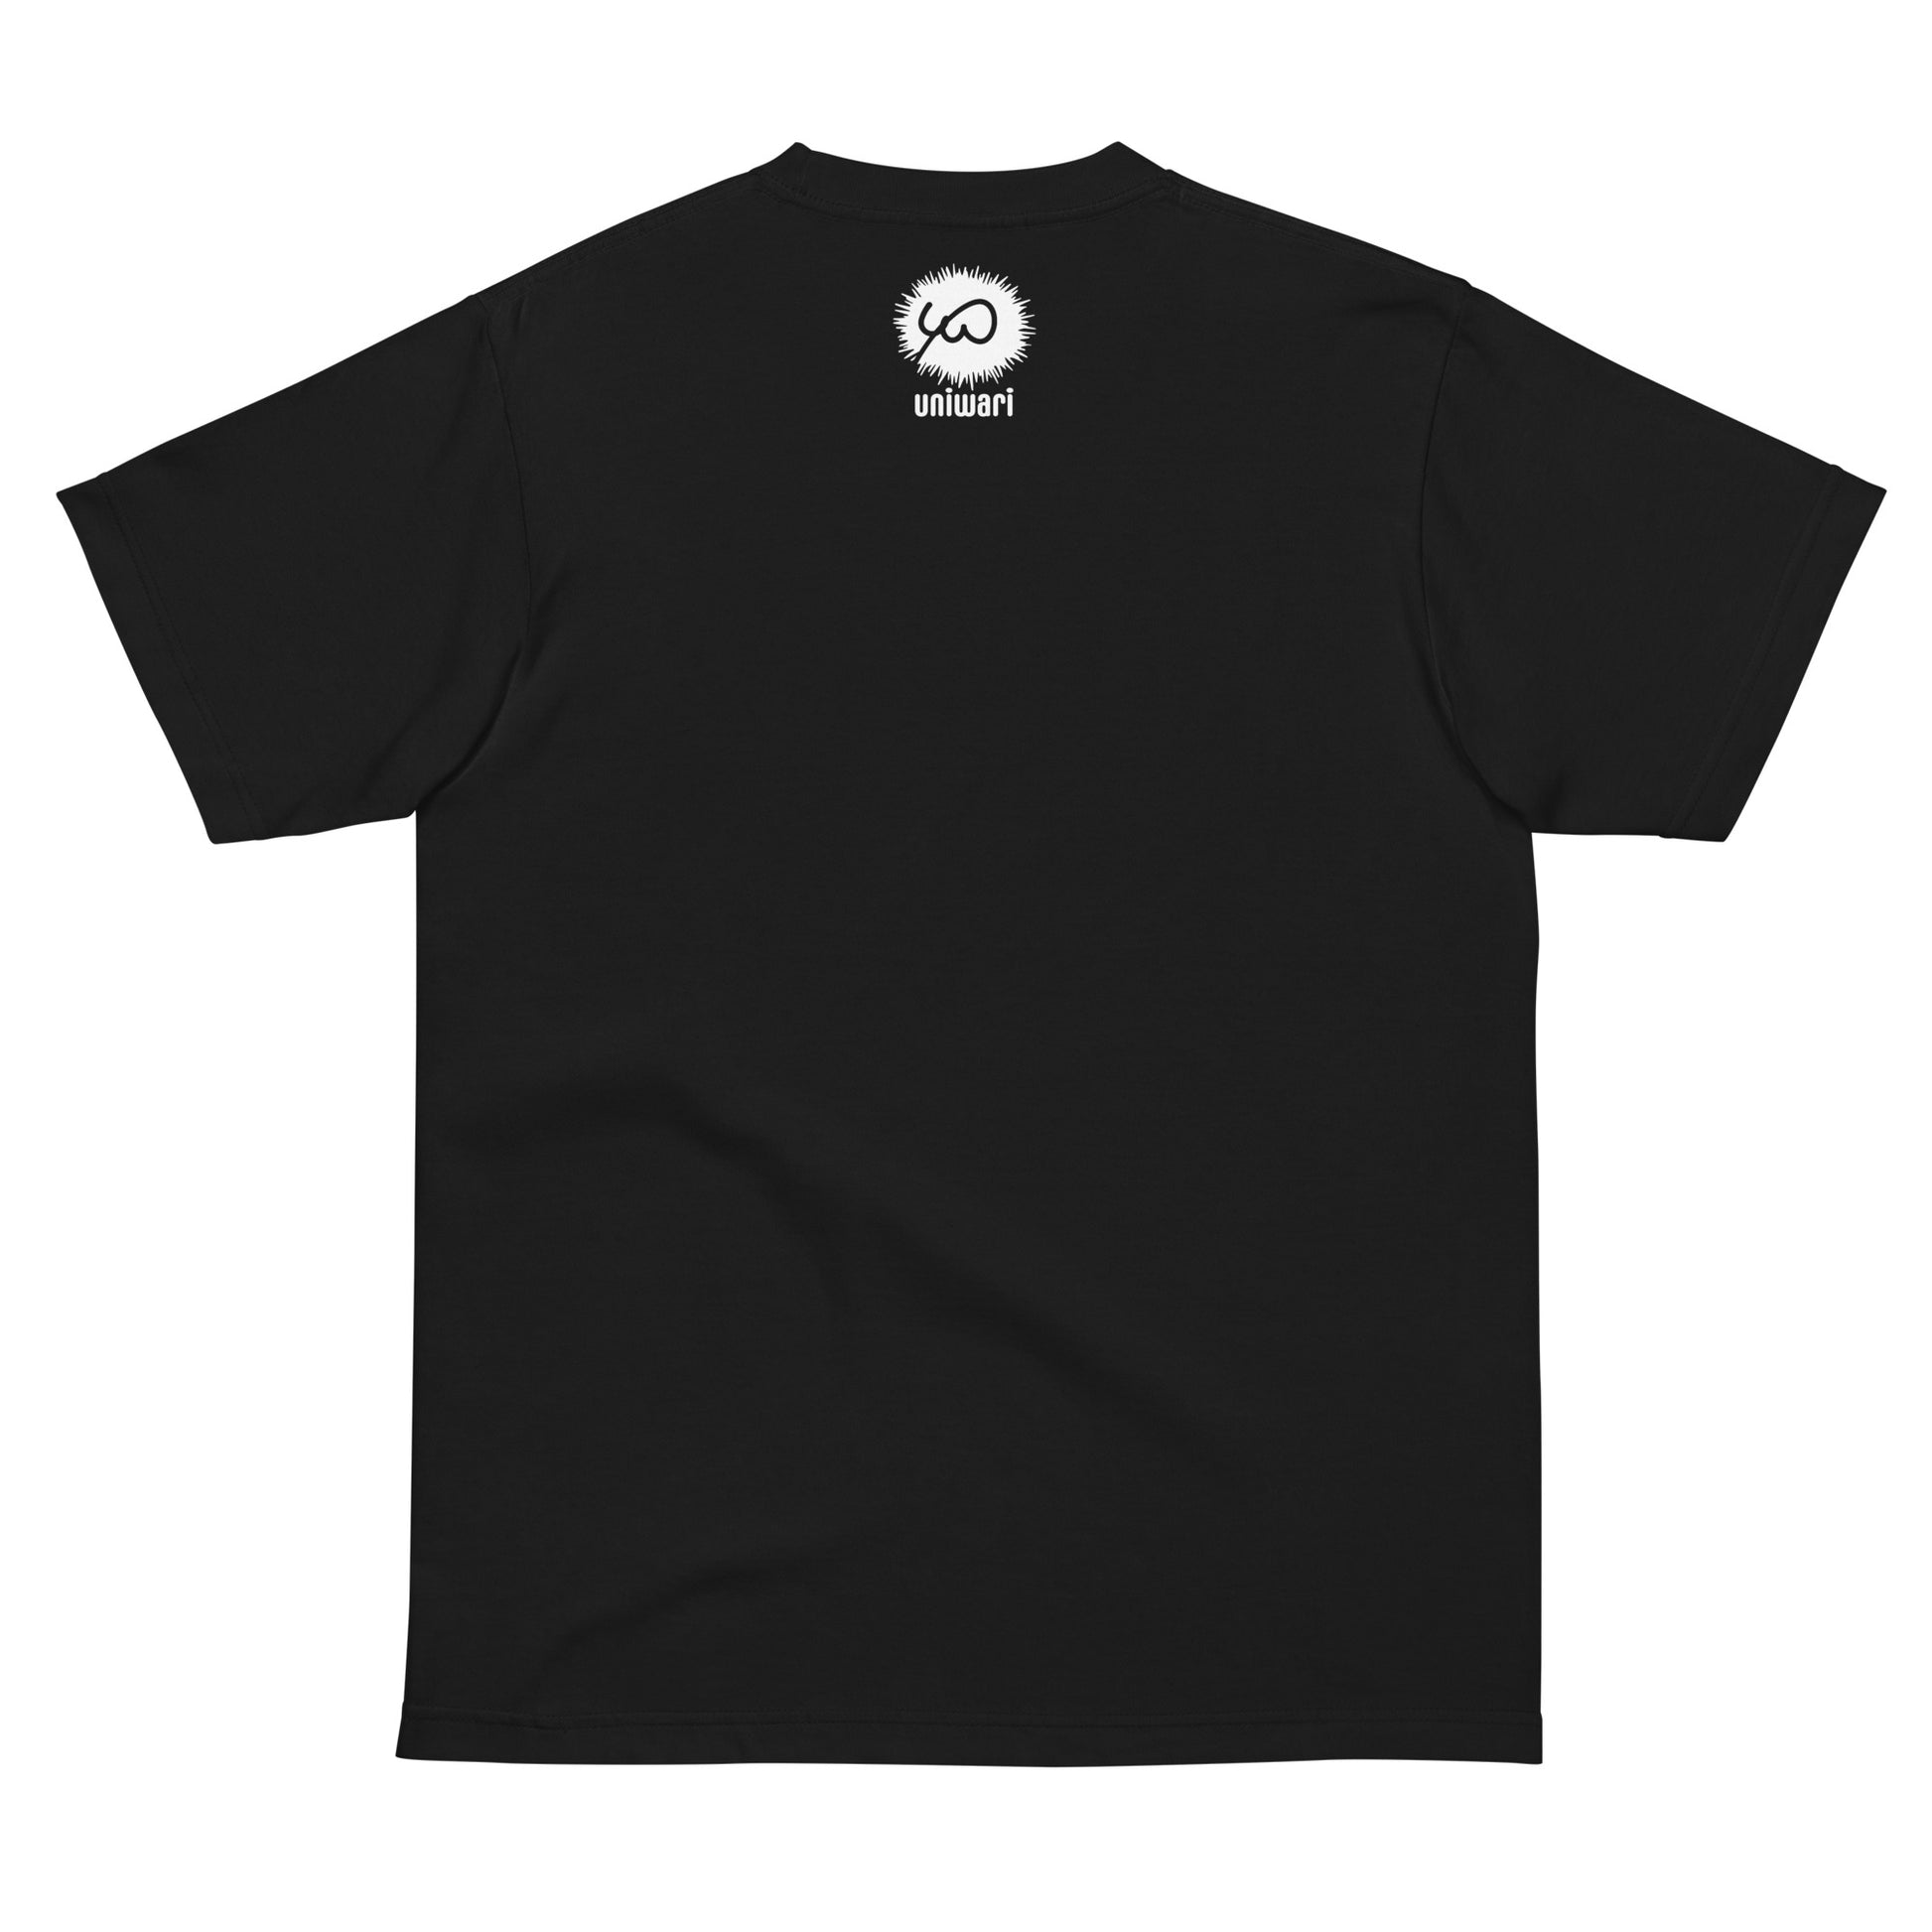 Black High Quality Tee - Front Design with an White Uniwari Logo - Back Design with Weekdays in Japanese and Green back ground